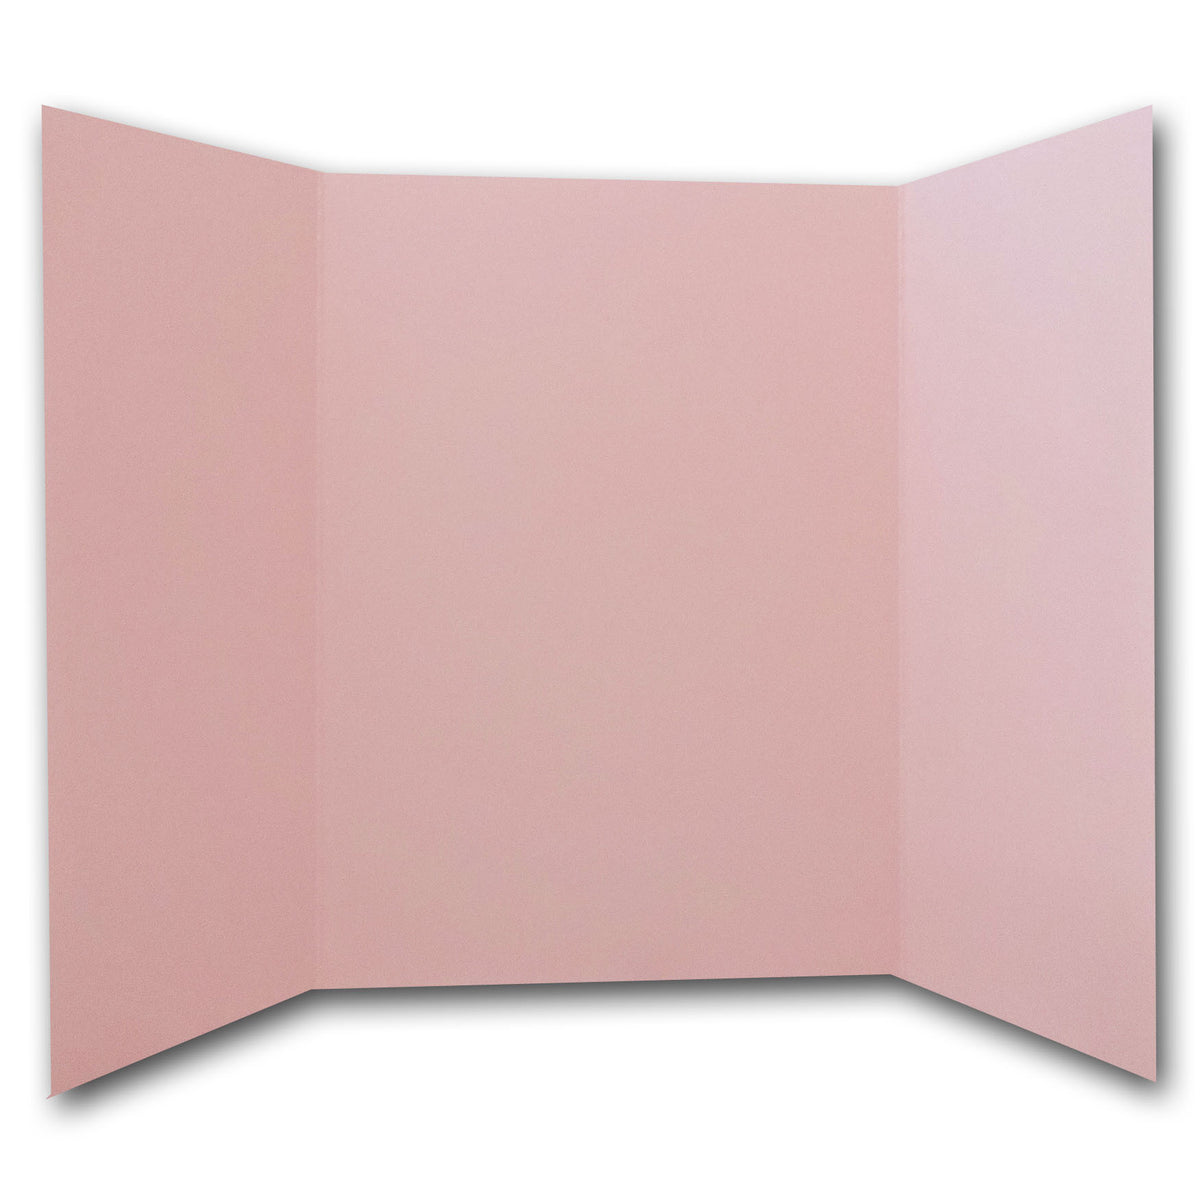 Pale Pink 5x7 Gate Fold Discount Card Stock for DIY Invitations